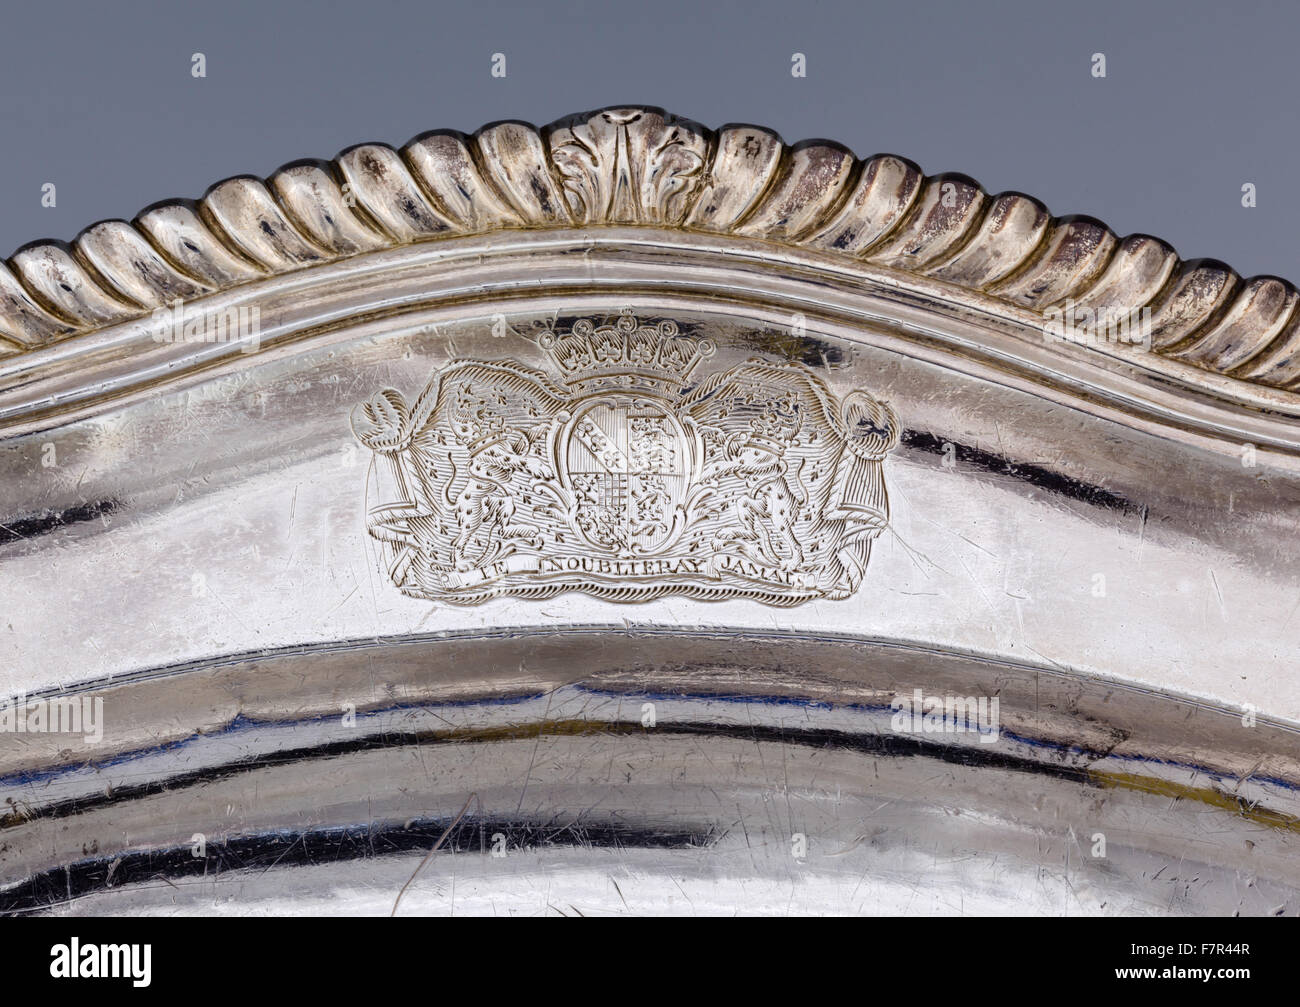 Oval meat dish, probably Frederick Kandler, c.1751, silver at Ickworth, Suffolk. Length 14 ¾ inches. Detail of engraved arms of the 2nd Earl of Bristol. National Trust Inventory number 852095.8. Stock Photo